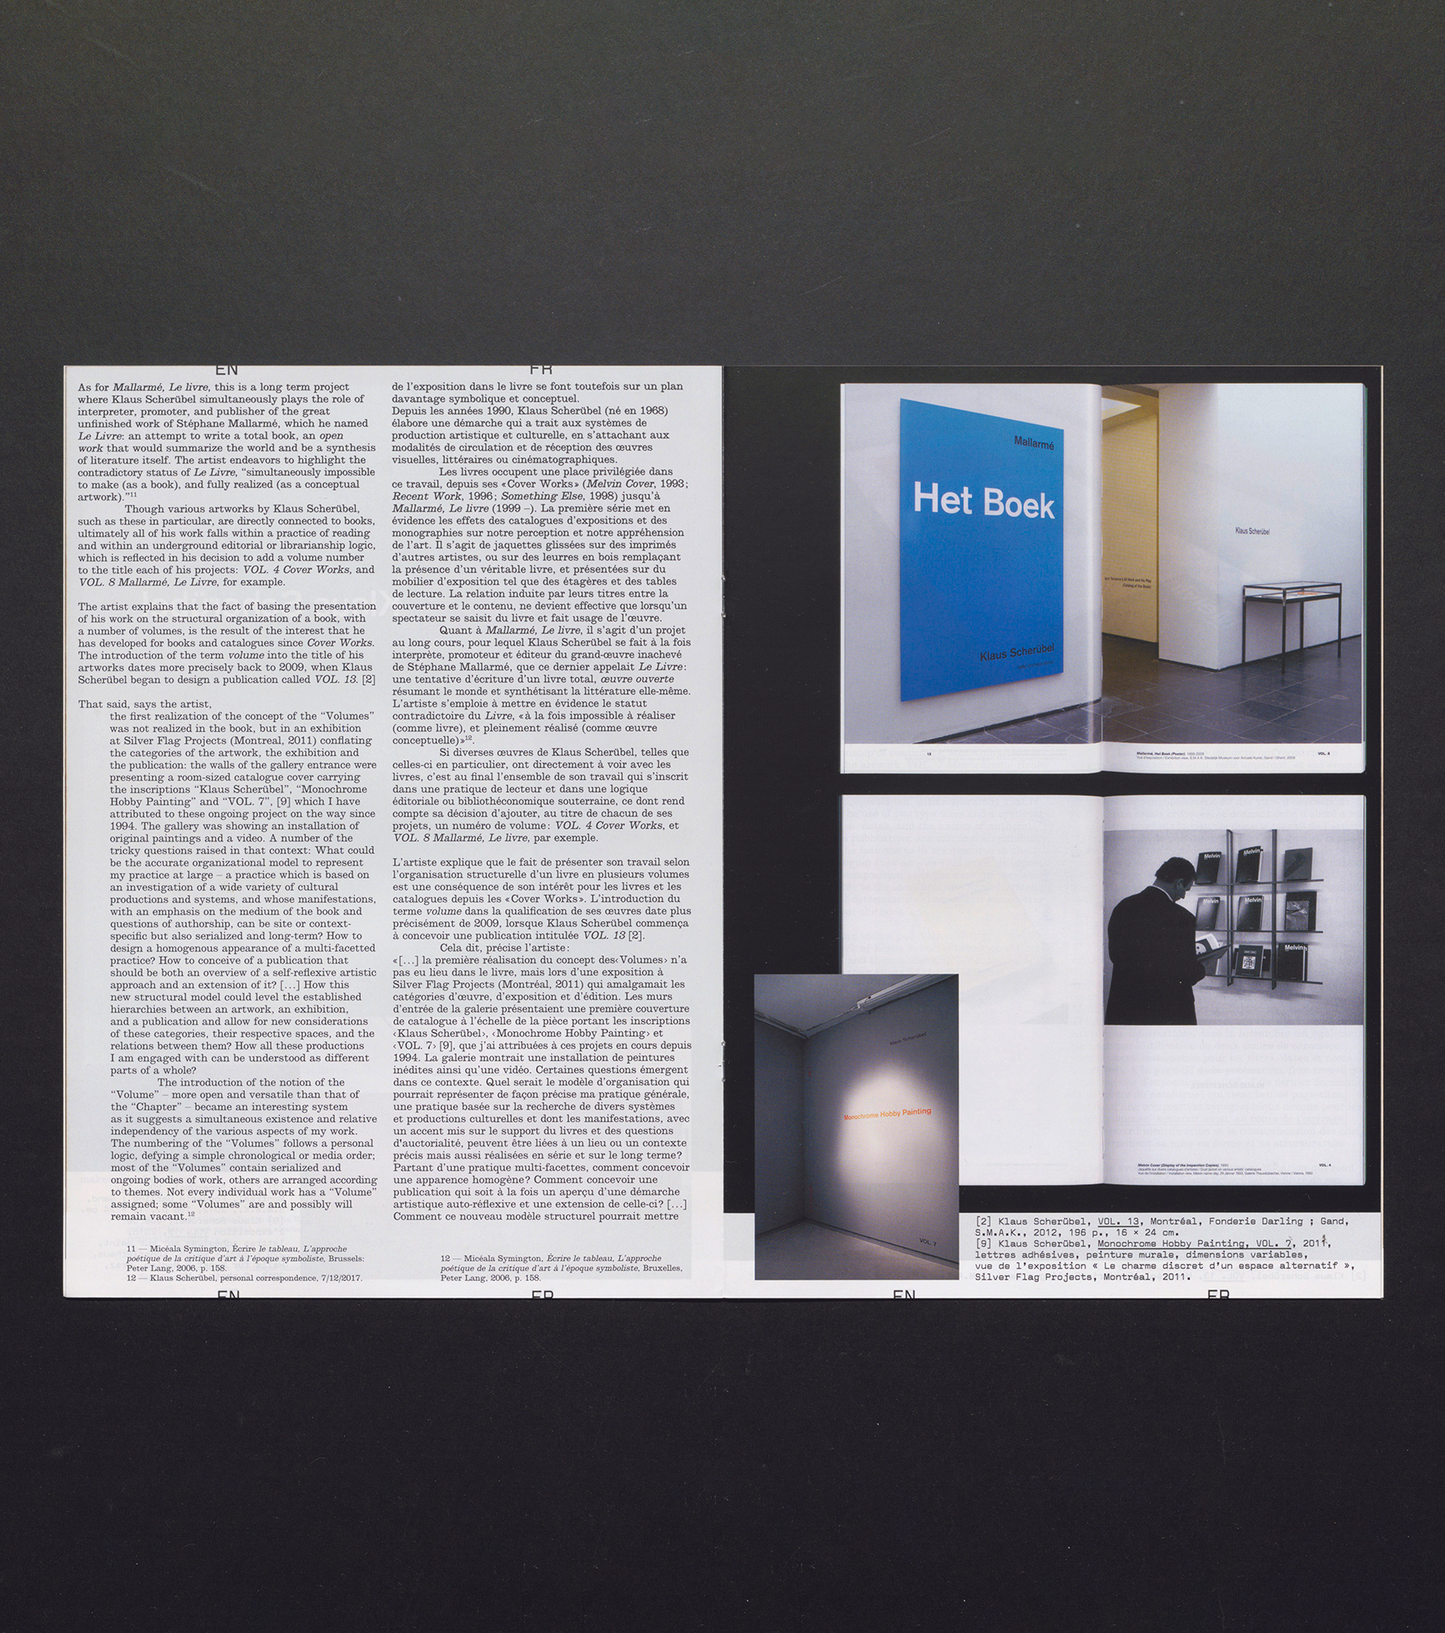 Revue Faire No. 11 - Books/exhibitions: VOL. 13 by Klaus Scherübel, Title of the Show by Julia Born and THEREHERETHENTHERE by Simon Starling.